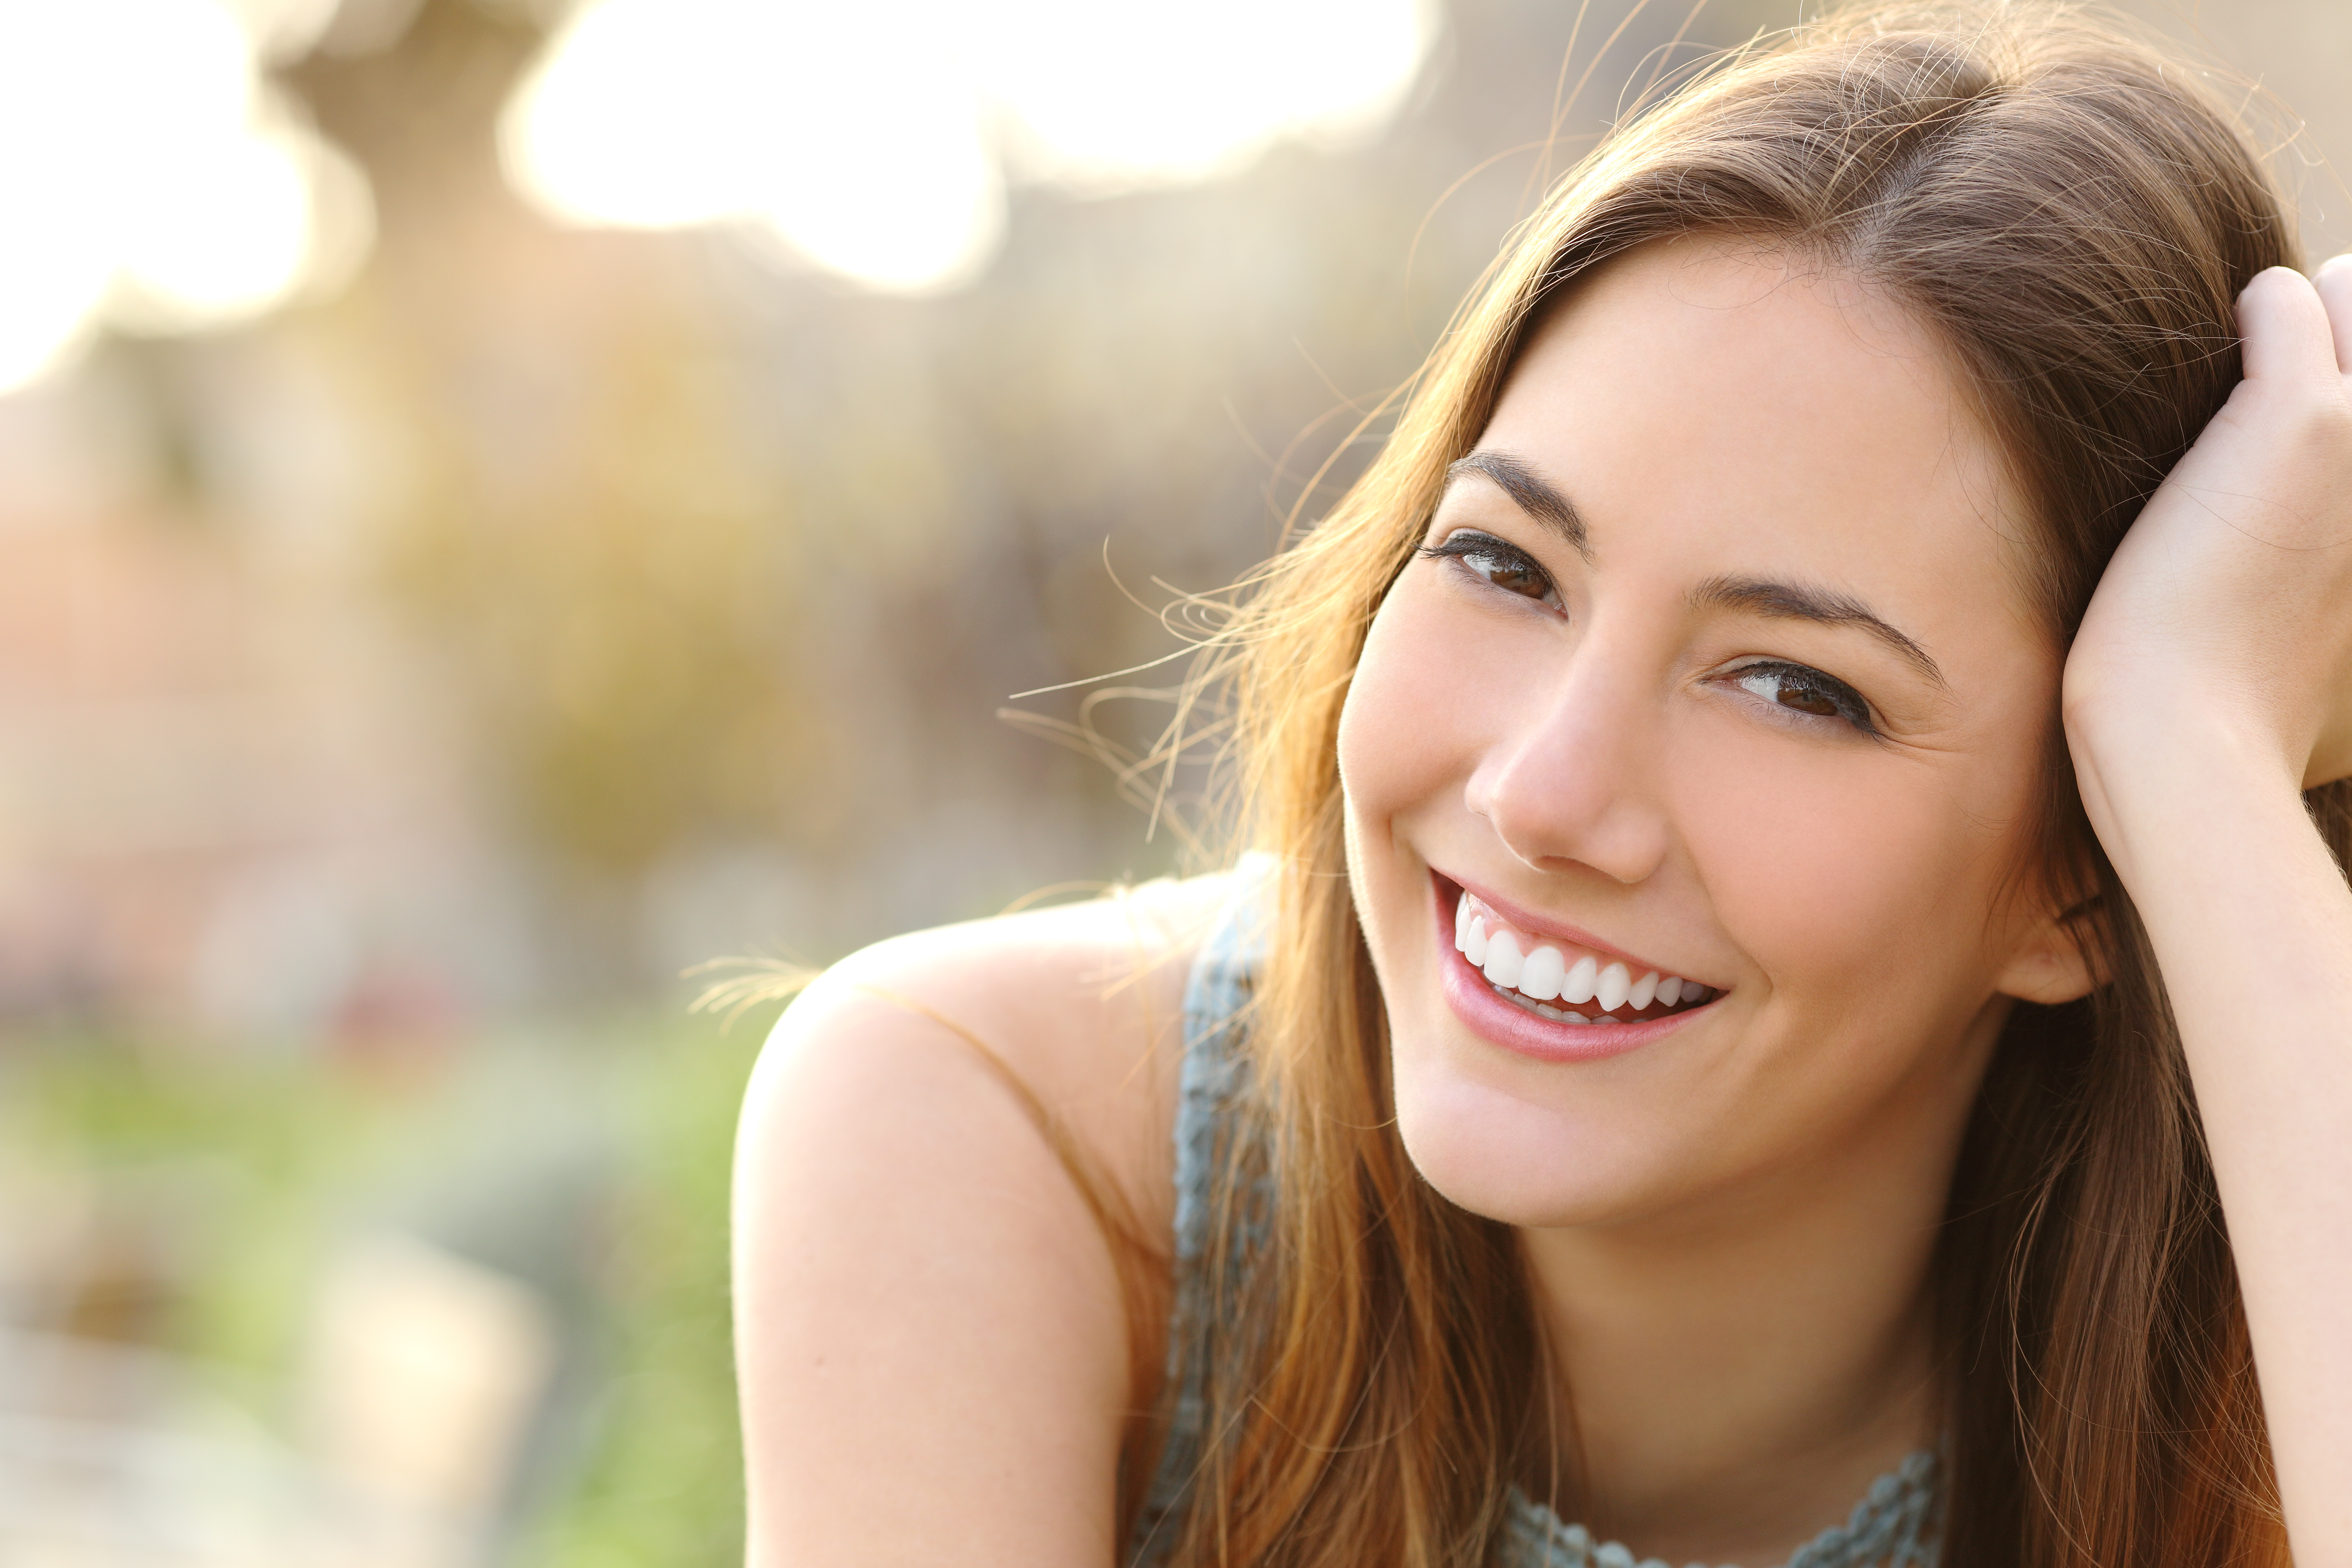 Ready for a new you? It's time for Women's hormone therapy in Boca! -